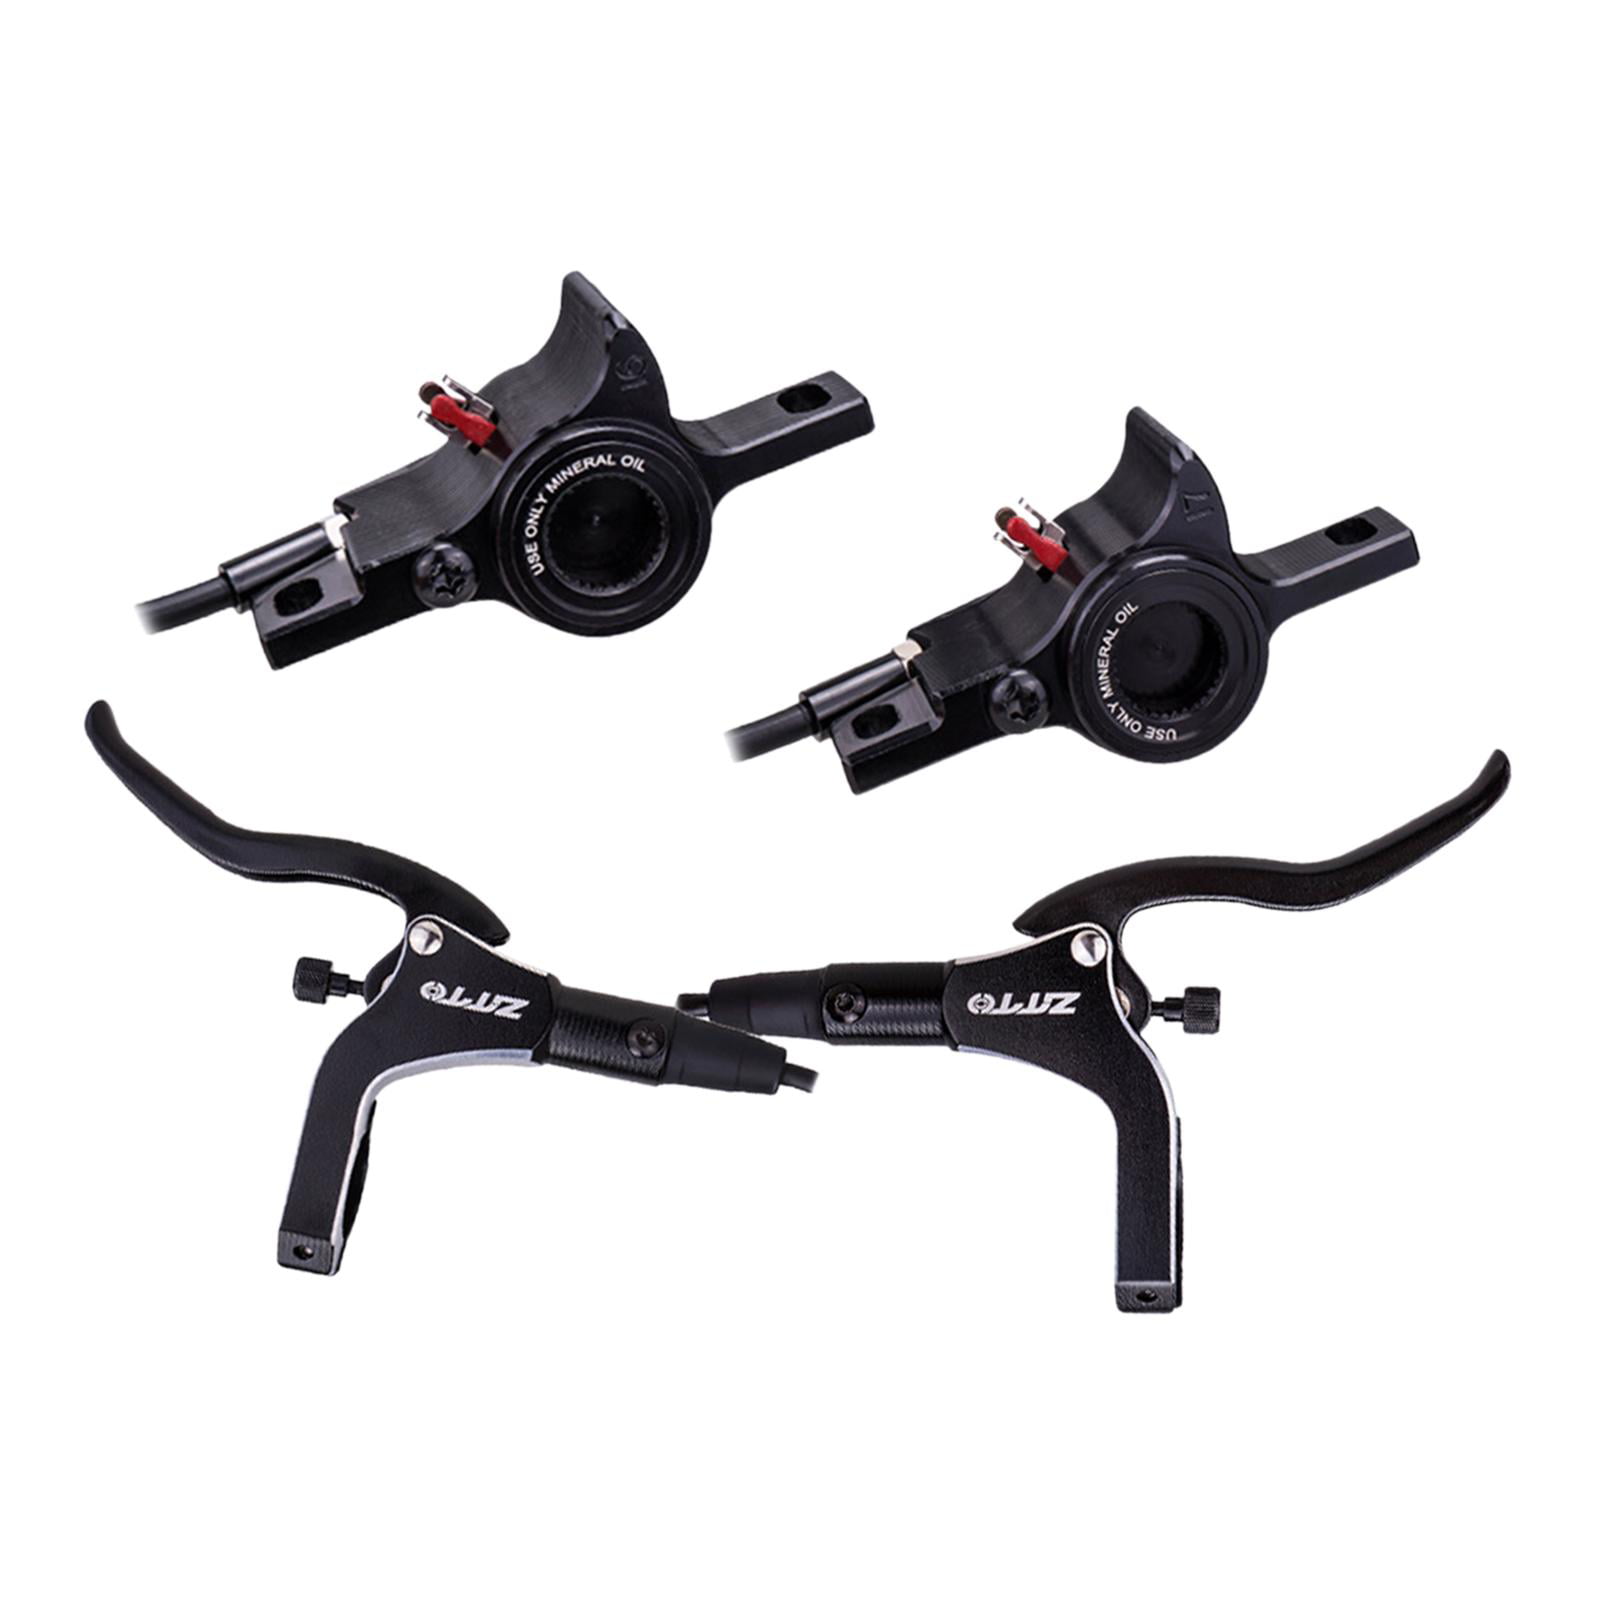 Hydraulic Disc Brakes Oil Disc For Mountain Bike MTB Cycling Front & Rear Set 